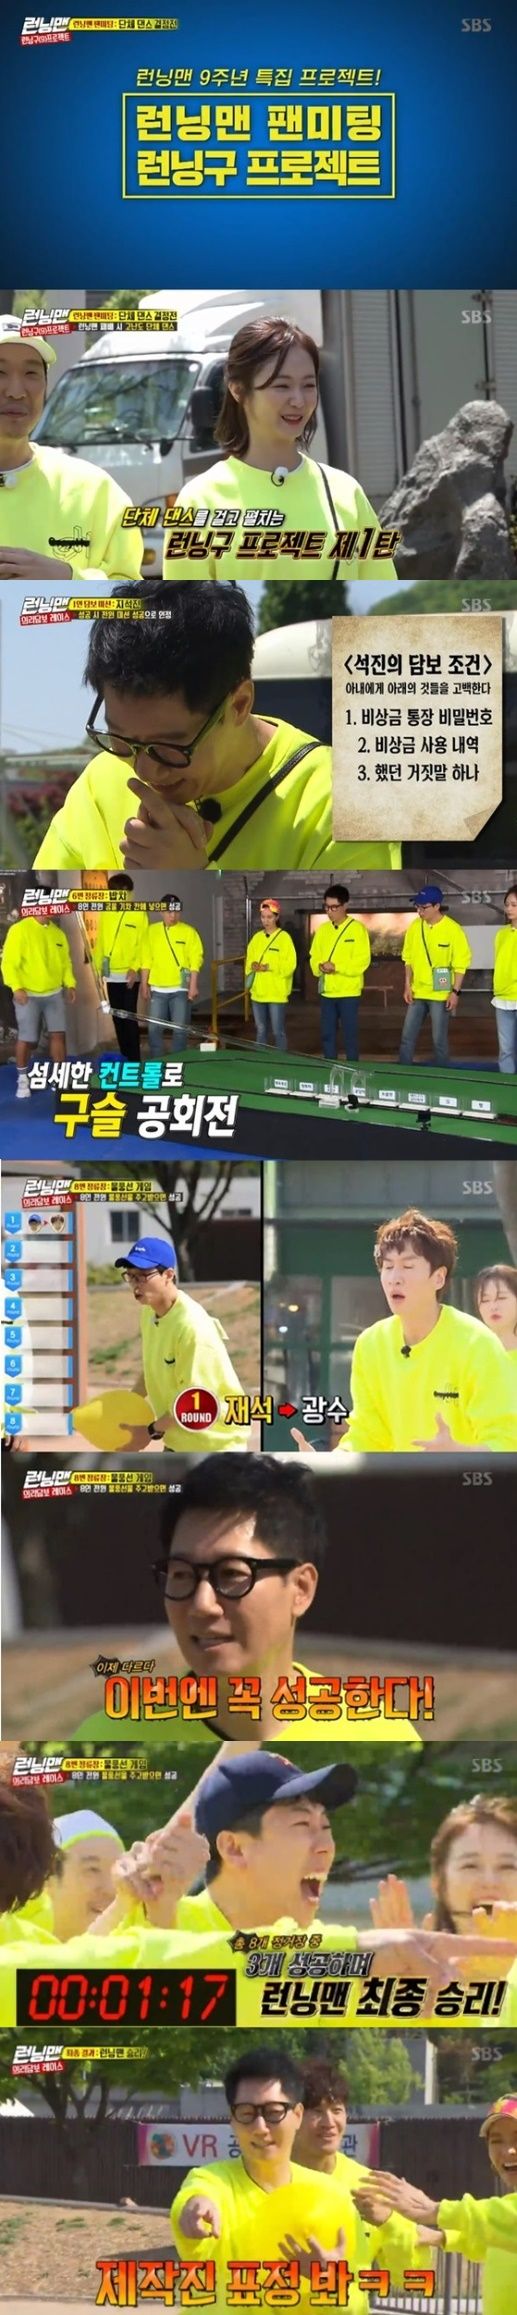 Running Man was the first to unveil the 9th anniversary special project Running Man Fan Meeting - Running Zone Project.According to Nielsen Korea, the average audience rating of SBS Running Man, which was broadcast on the 19th, showed an increase of 5.3% in the first part and 8.4% in the second part (based on the audience rating of households in the Seoul Capital Area), and the highest audience rating per minute rose to 8.9%.The 2049 Target Viewpoint, an important indicator of advertising officials, ranked first in the same time zone with 5.1% (based on the second part of the Seoul Capital Areas audience rating), which was higher than last week.On the day of the broadcast, the Running Man 9th anniversary special project Running Man Fan Meeting - Running Project was first released.The crew and members who had a special race for four weeks with the right to organize a fan meeting queue sheet played their first showdown on the broadcast on the day.If the members win, they can dance in addition to the candidate dance prepared by the production team, but if they lose, they have to dance recommended by the production team.The members were united in teamwork and started a fierce 8th round confrontation with the production team, eventually winning three wins and winning the victory.The final victory of the members was the highest audience rating of 8.9% per minute, winning the best one minute.On the other hand, Running Man, which is expected to appear as a guest of Lee Sang-yeop and Lim Soo-hyang, will be broadcasted at 5 pm on the 26th.